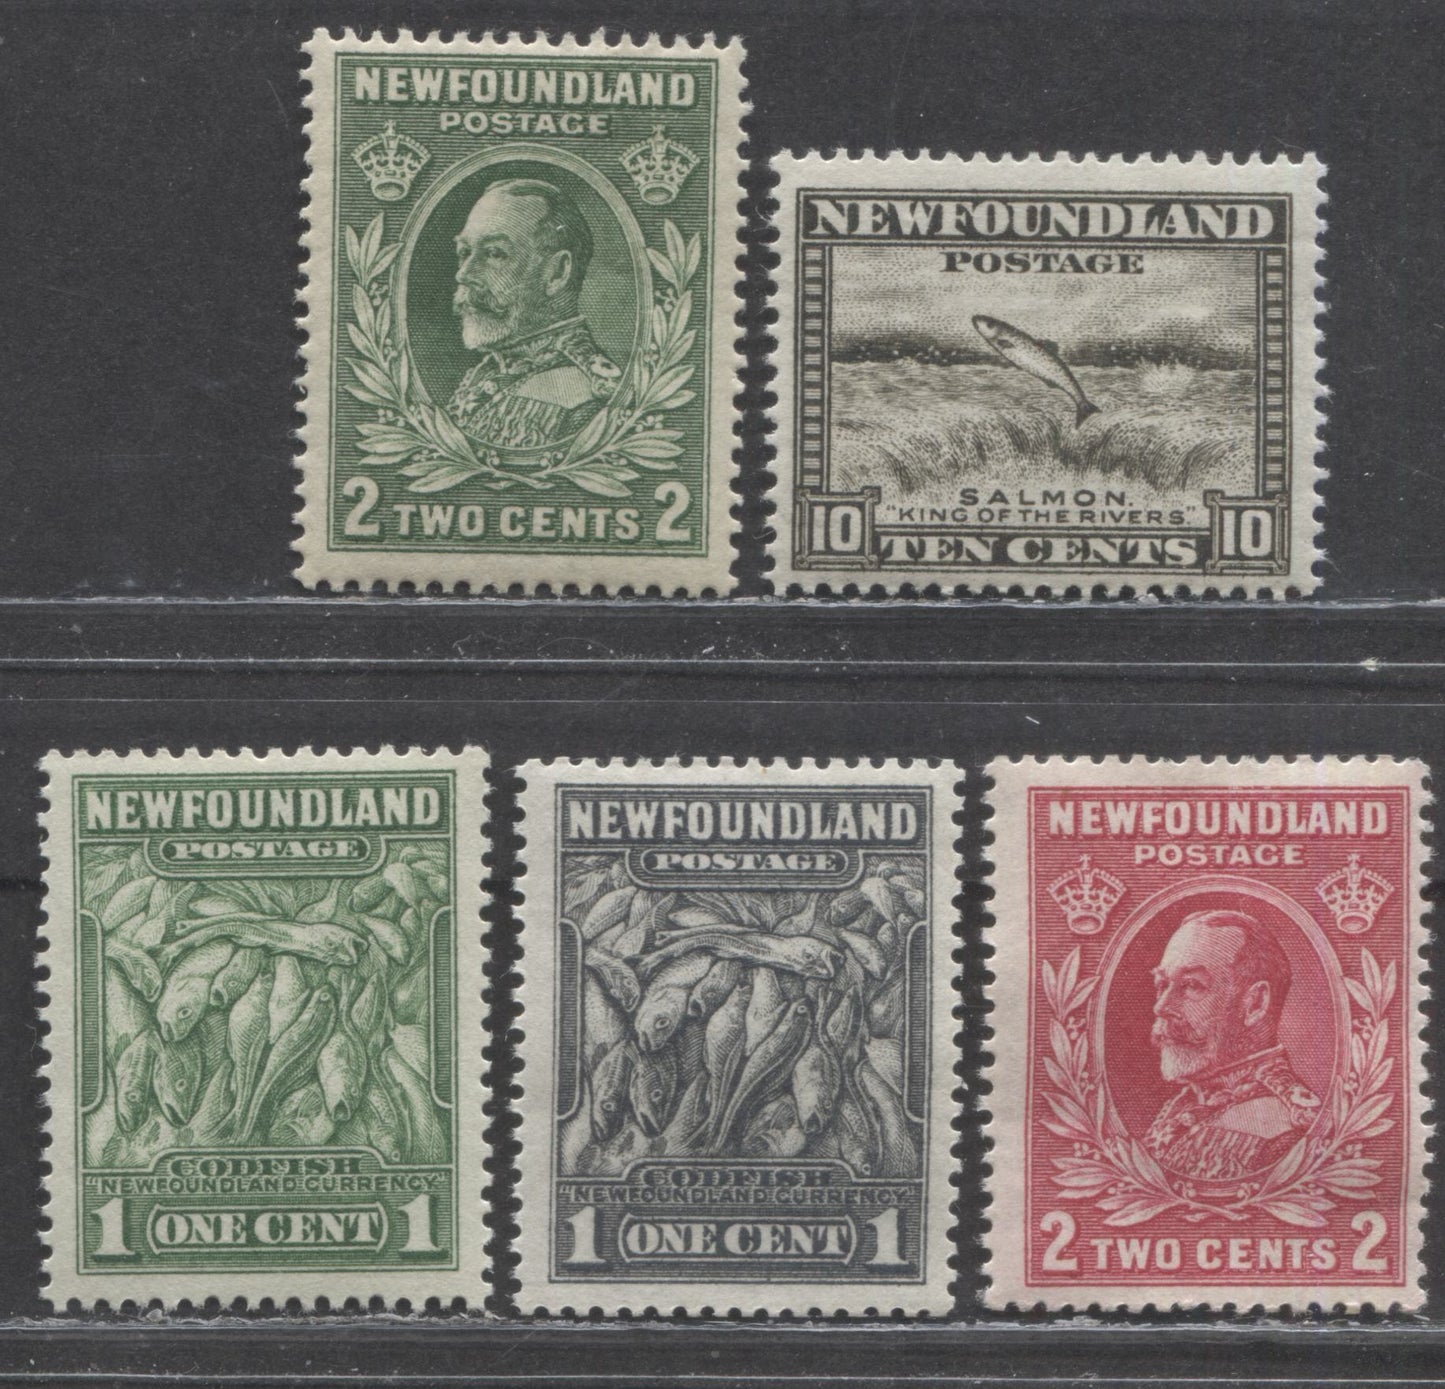 Lot 207 Newfoundland #183-186, 193 1c - 10c Green - Olive Black Codfish - Salmon Leaping, 1932-1937 Definitive Issues, 5 F/VFNH Singles